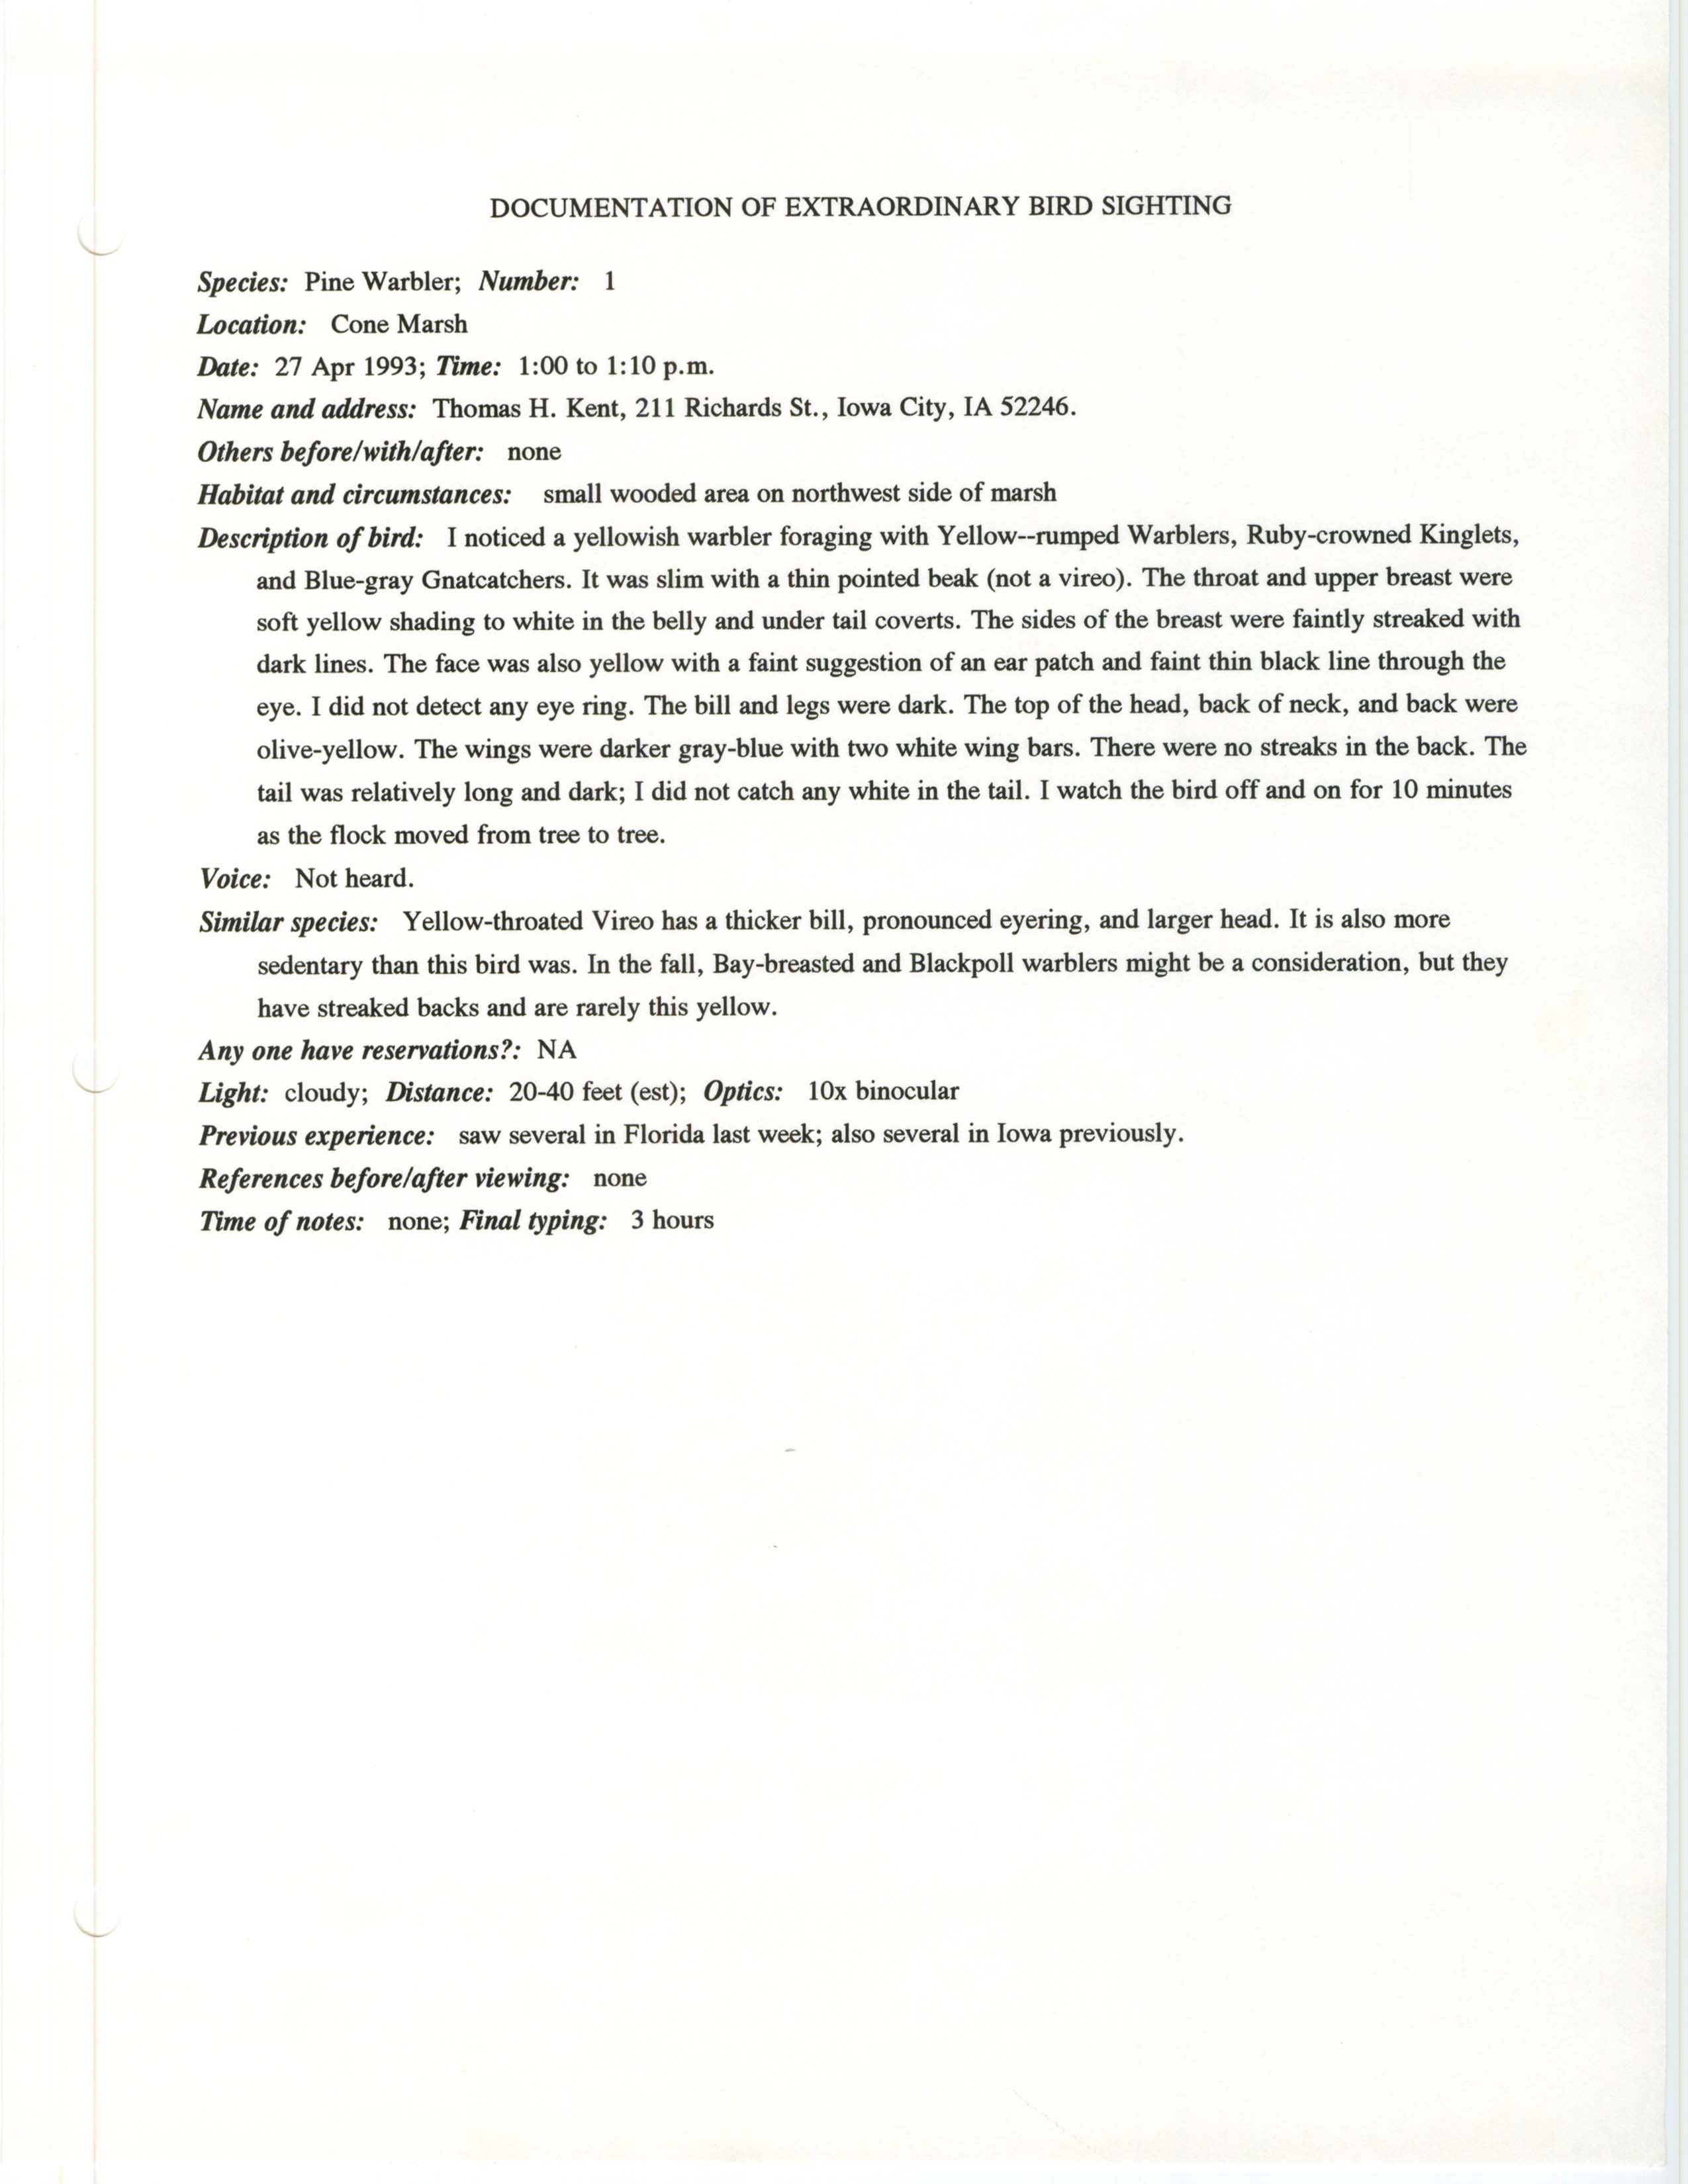 Rare bird documentation form for Pine Warbler at Cone Marsh, 1993